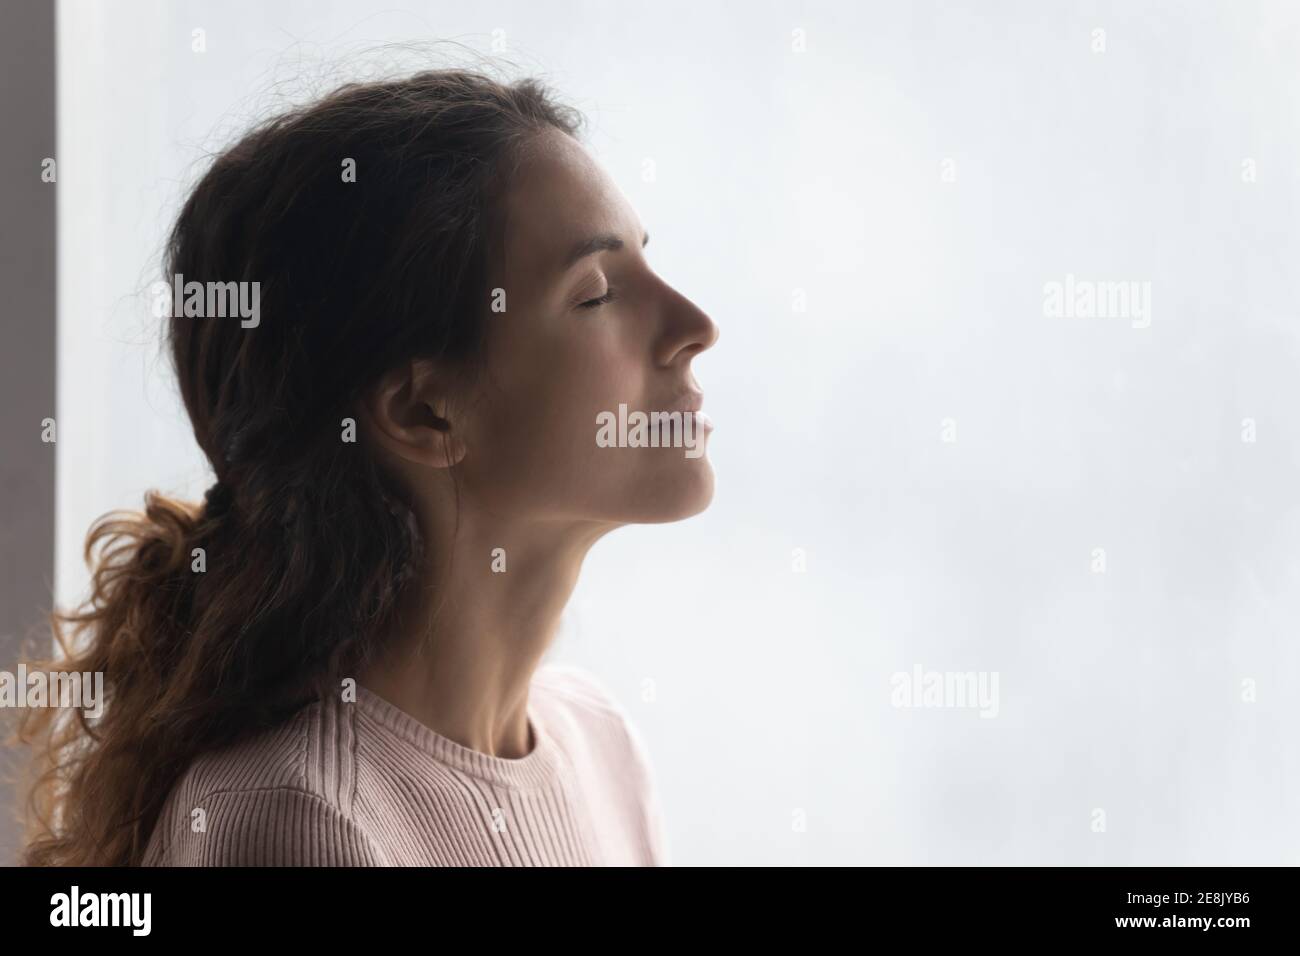 Mindful smiling beautiful young woman breathing fresh air. Stock Photo